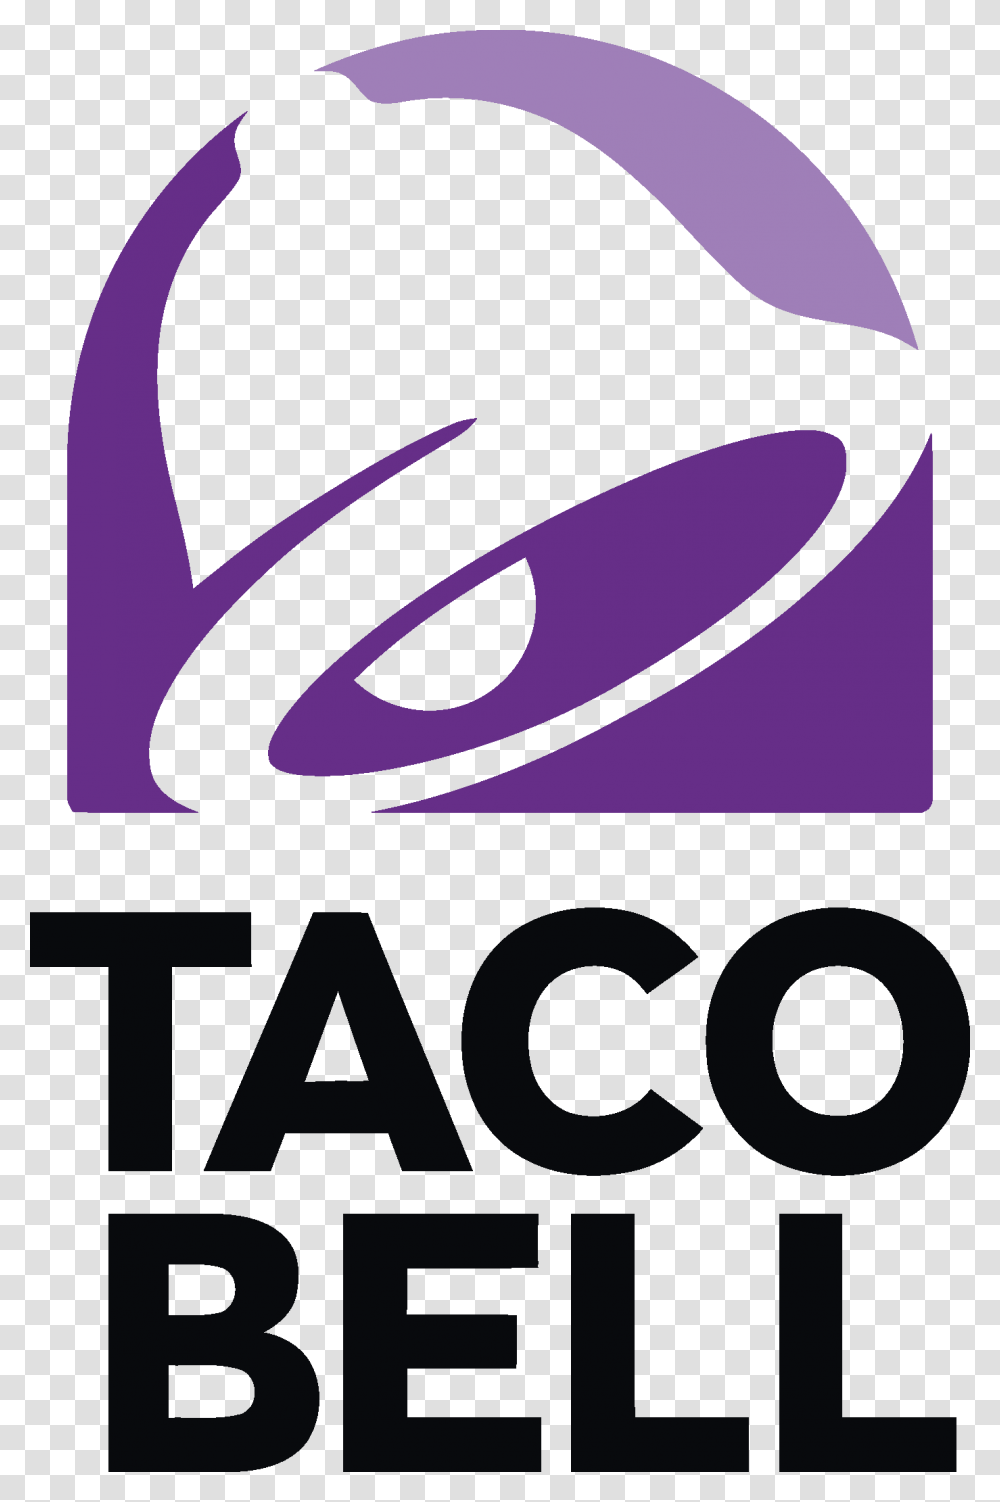 Taco Bell Logo Pdf Vector Icon Template Clipart Free Taco Bell Emblem Hd, Label Transparent Png